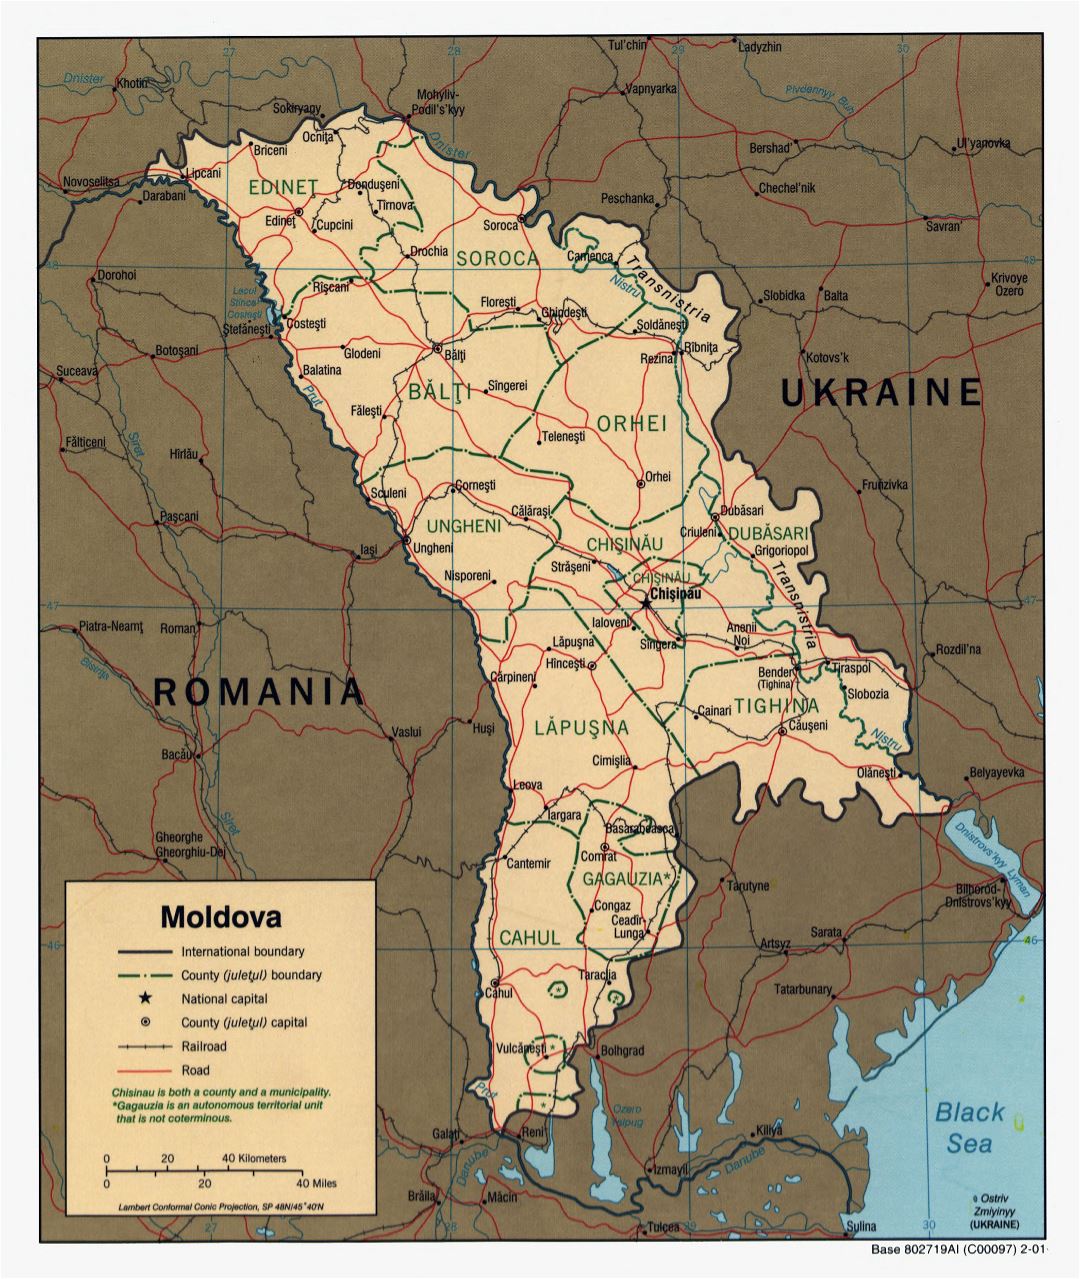 Large scale political and administrative map of Moldova with roads, railroads and major cities - 2001